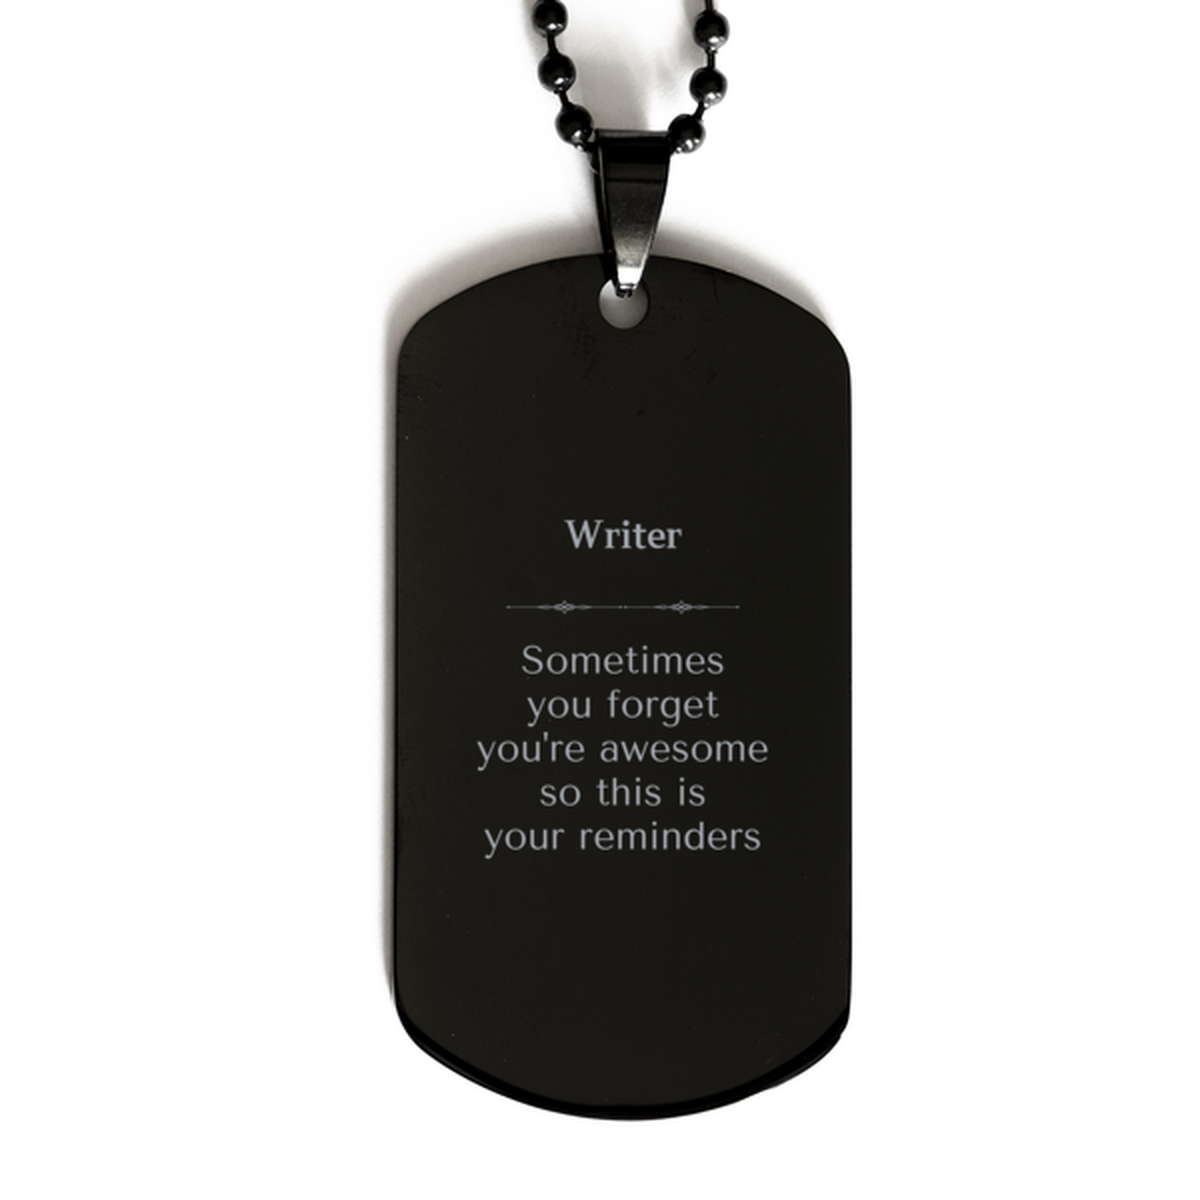 Sentimental Writer Black Dog Tag, Writer Sometimes you forget you're awesome so this is your reminders, Graduation Christmas Birthday Gifts for Writer, Men, Women, Coworkers